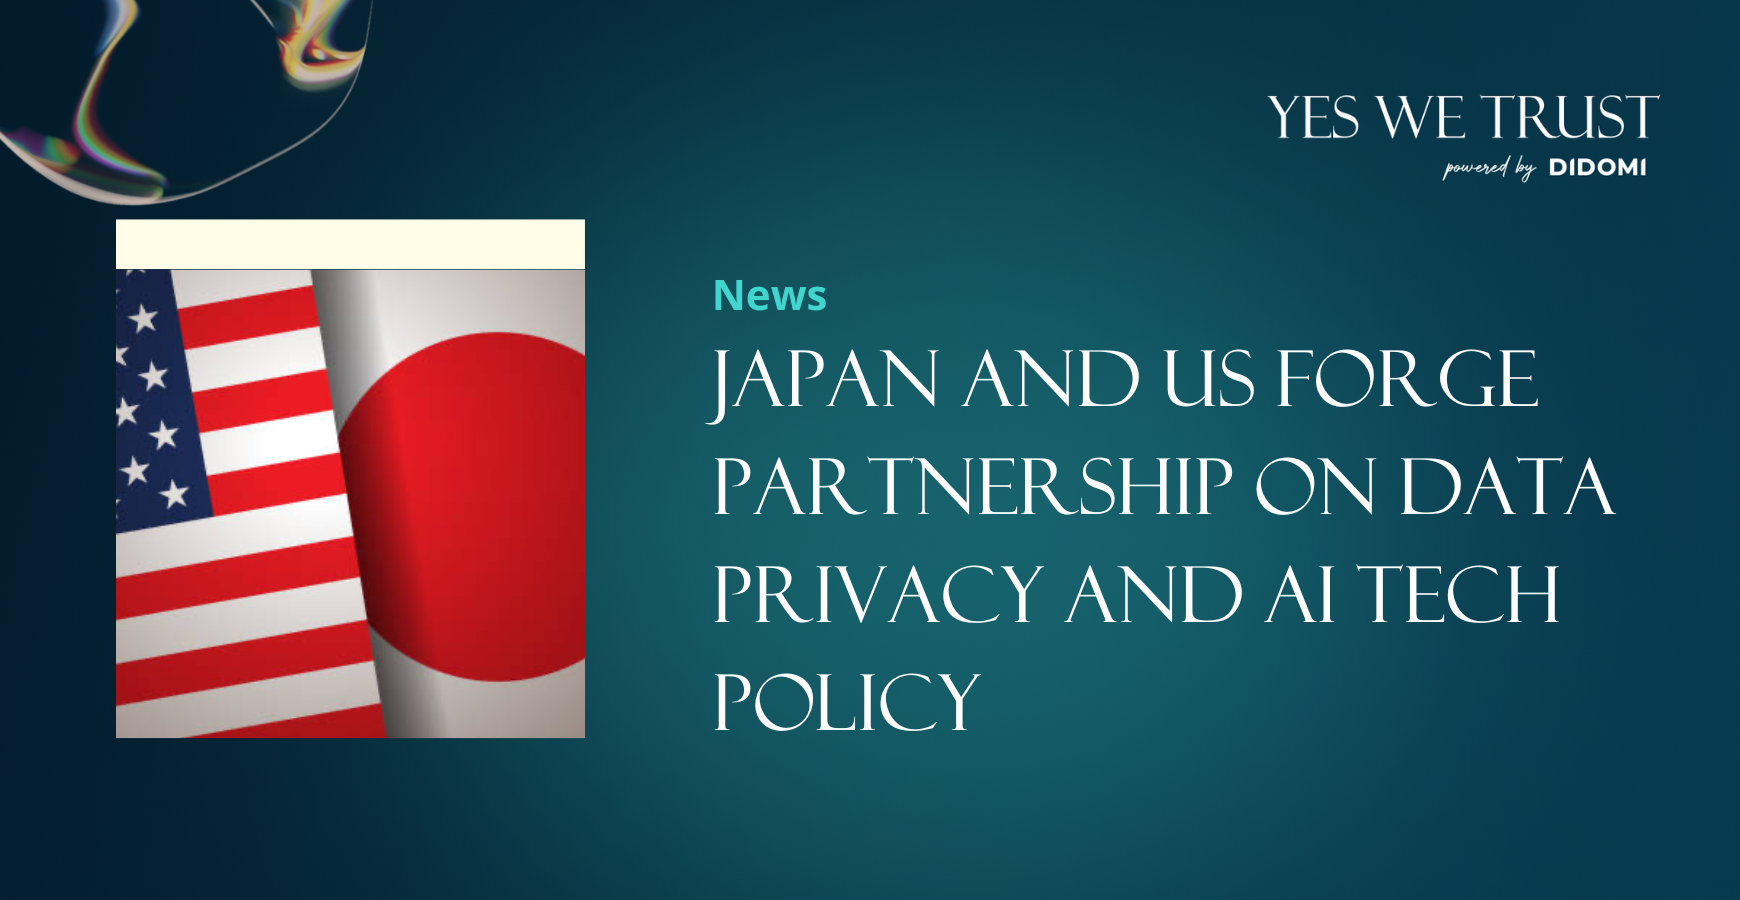 Japan and U.S. forge partnership on data privacy and AI tech policy